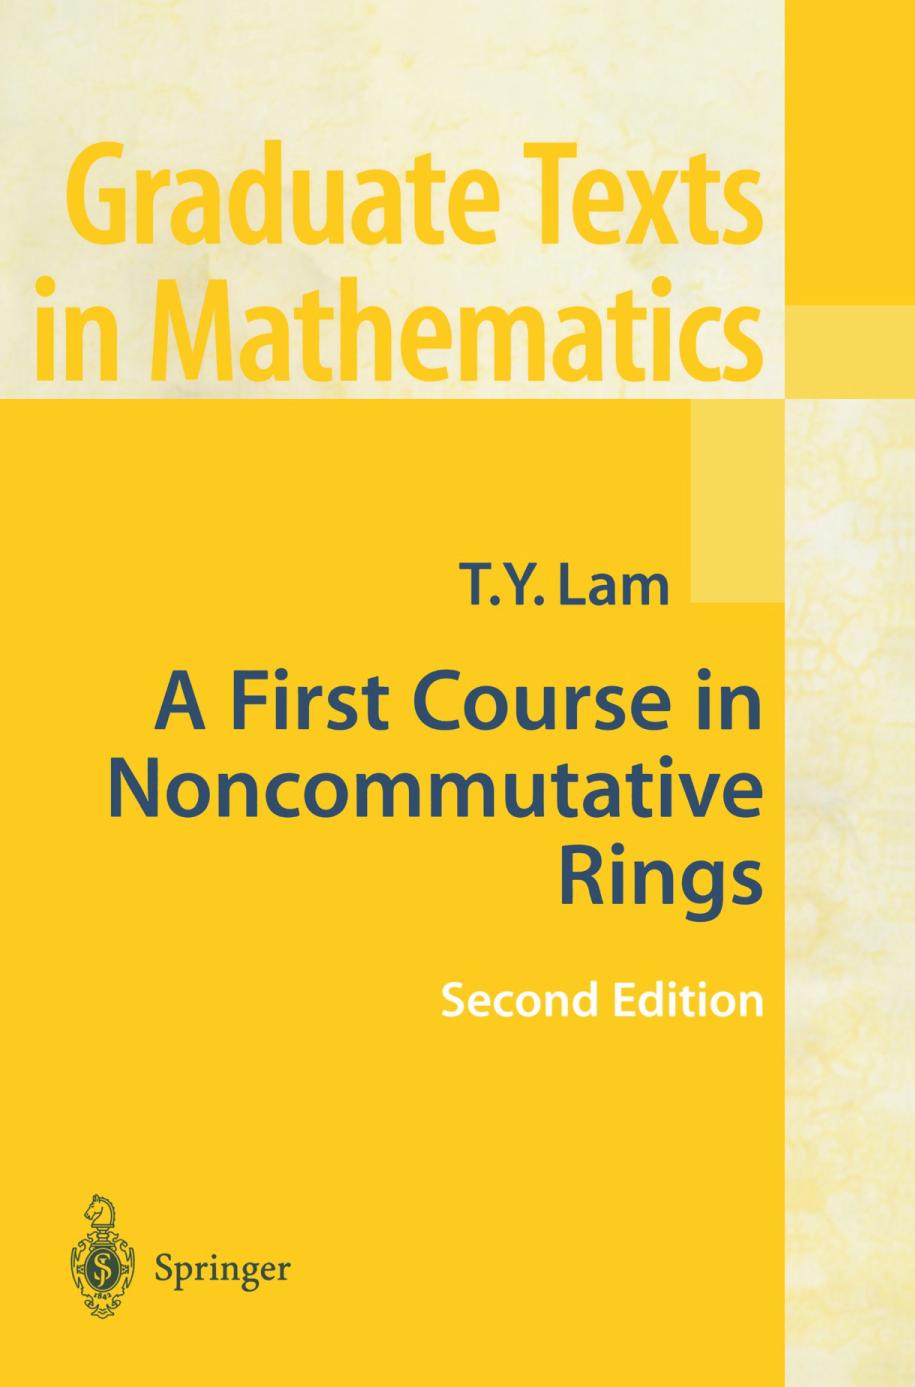 A first course in noncommutative rings